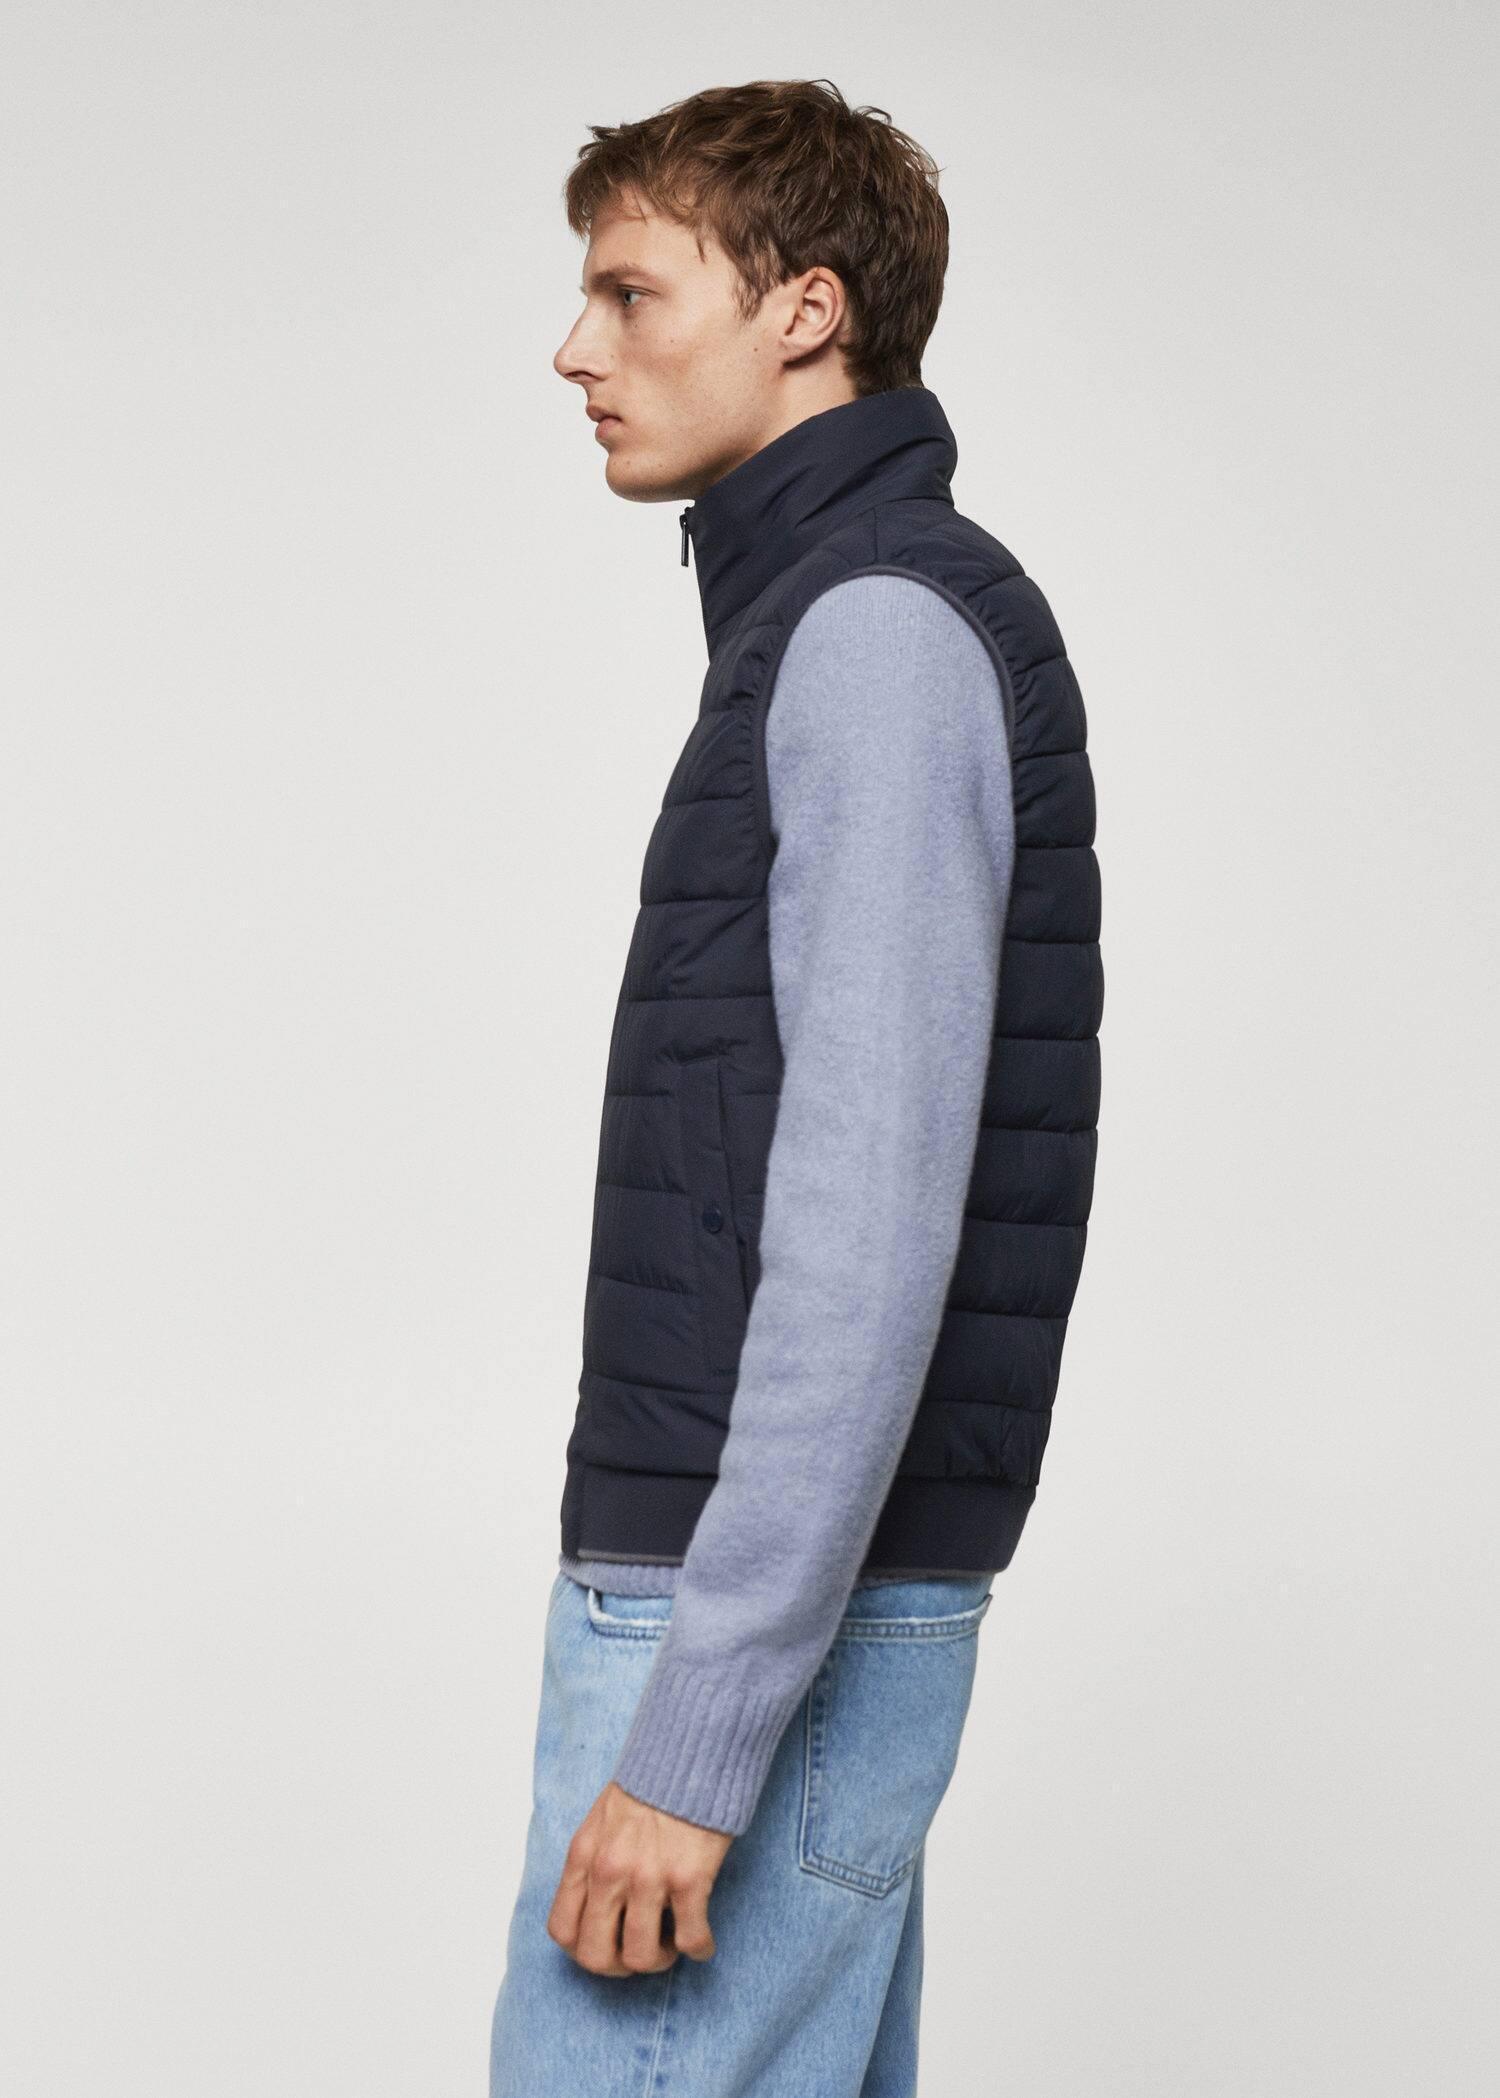 Mango - Navy Ultralight Quilted Gilet